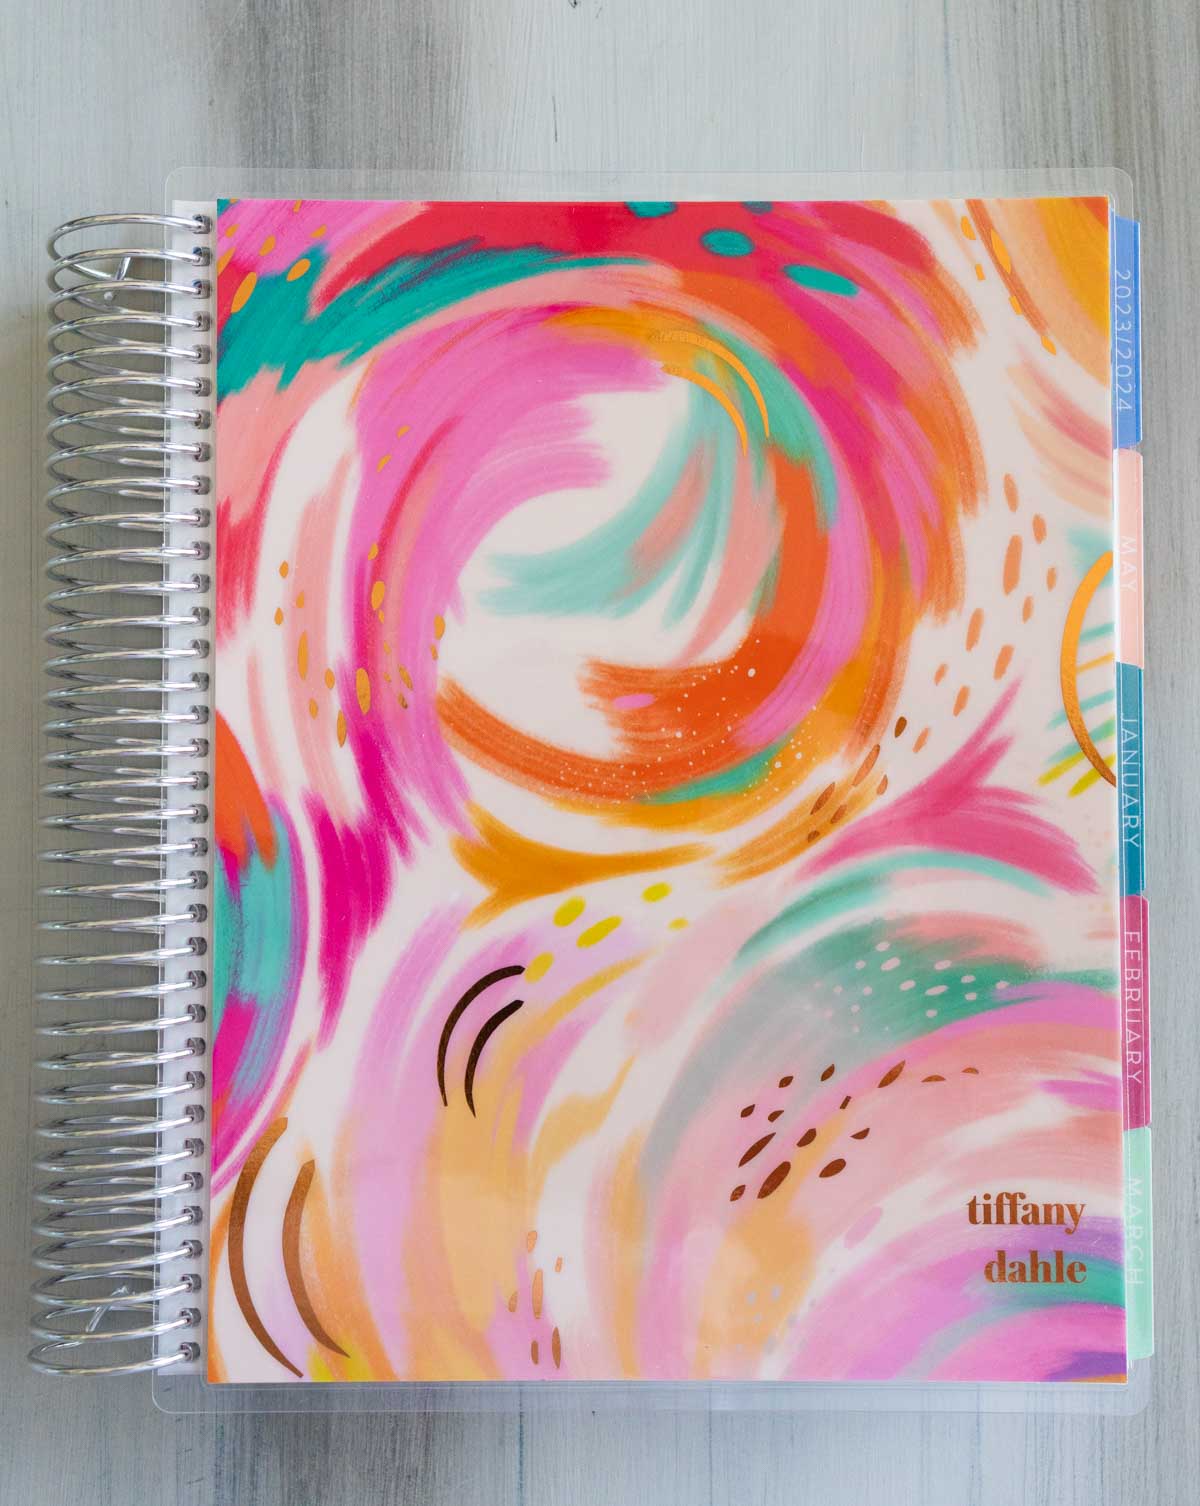 The front of the Erin Condren planner has colorful pink, orange, and teal swirls.